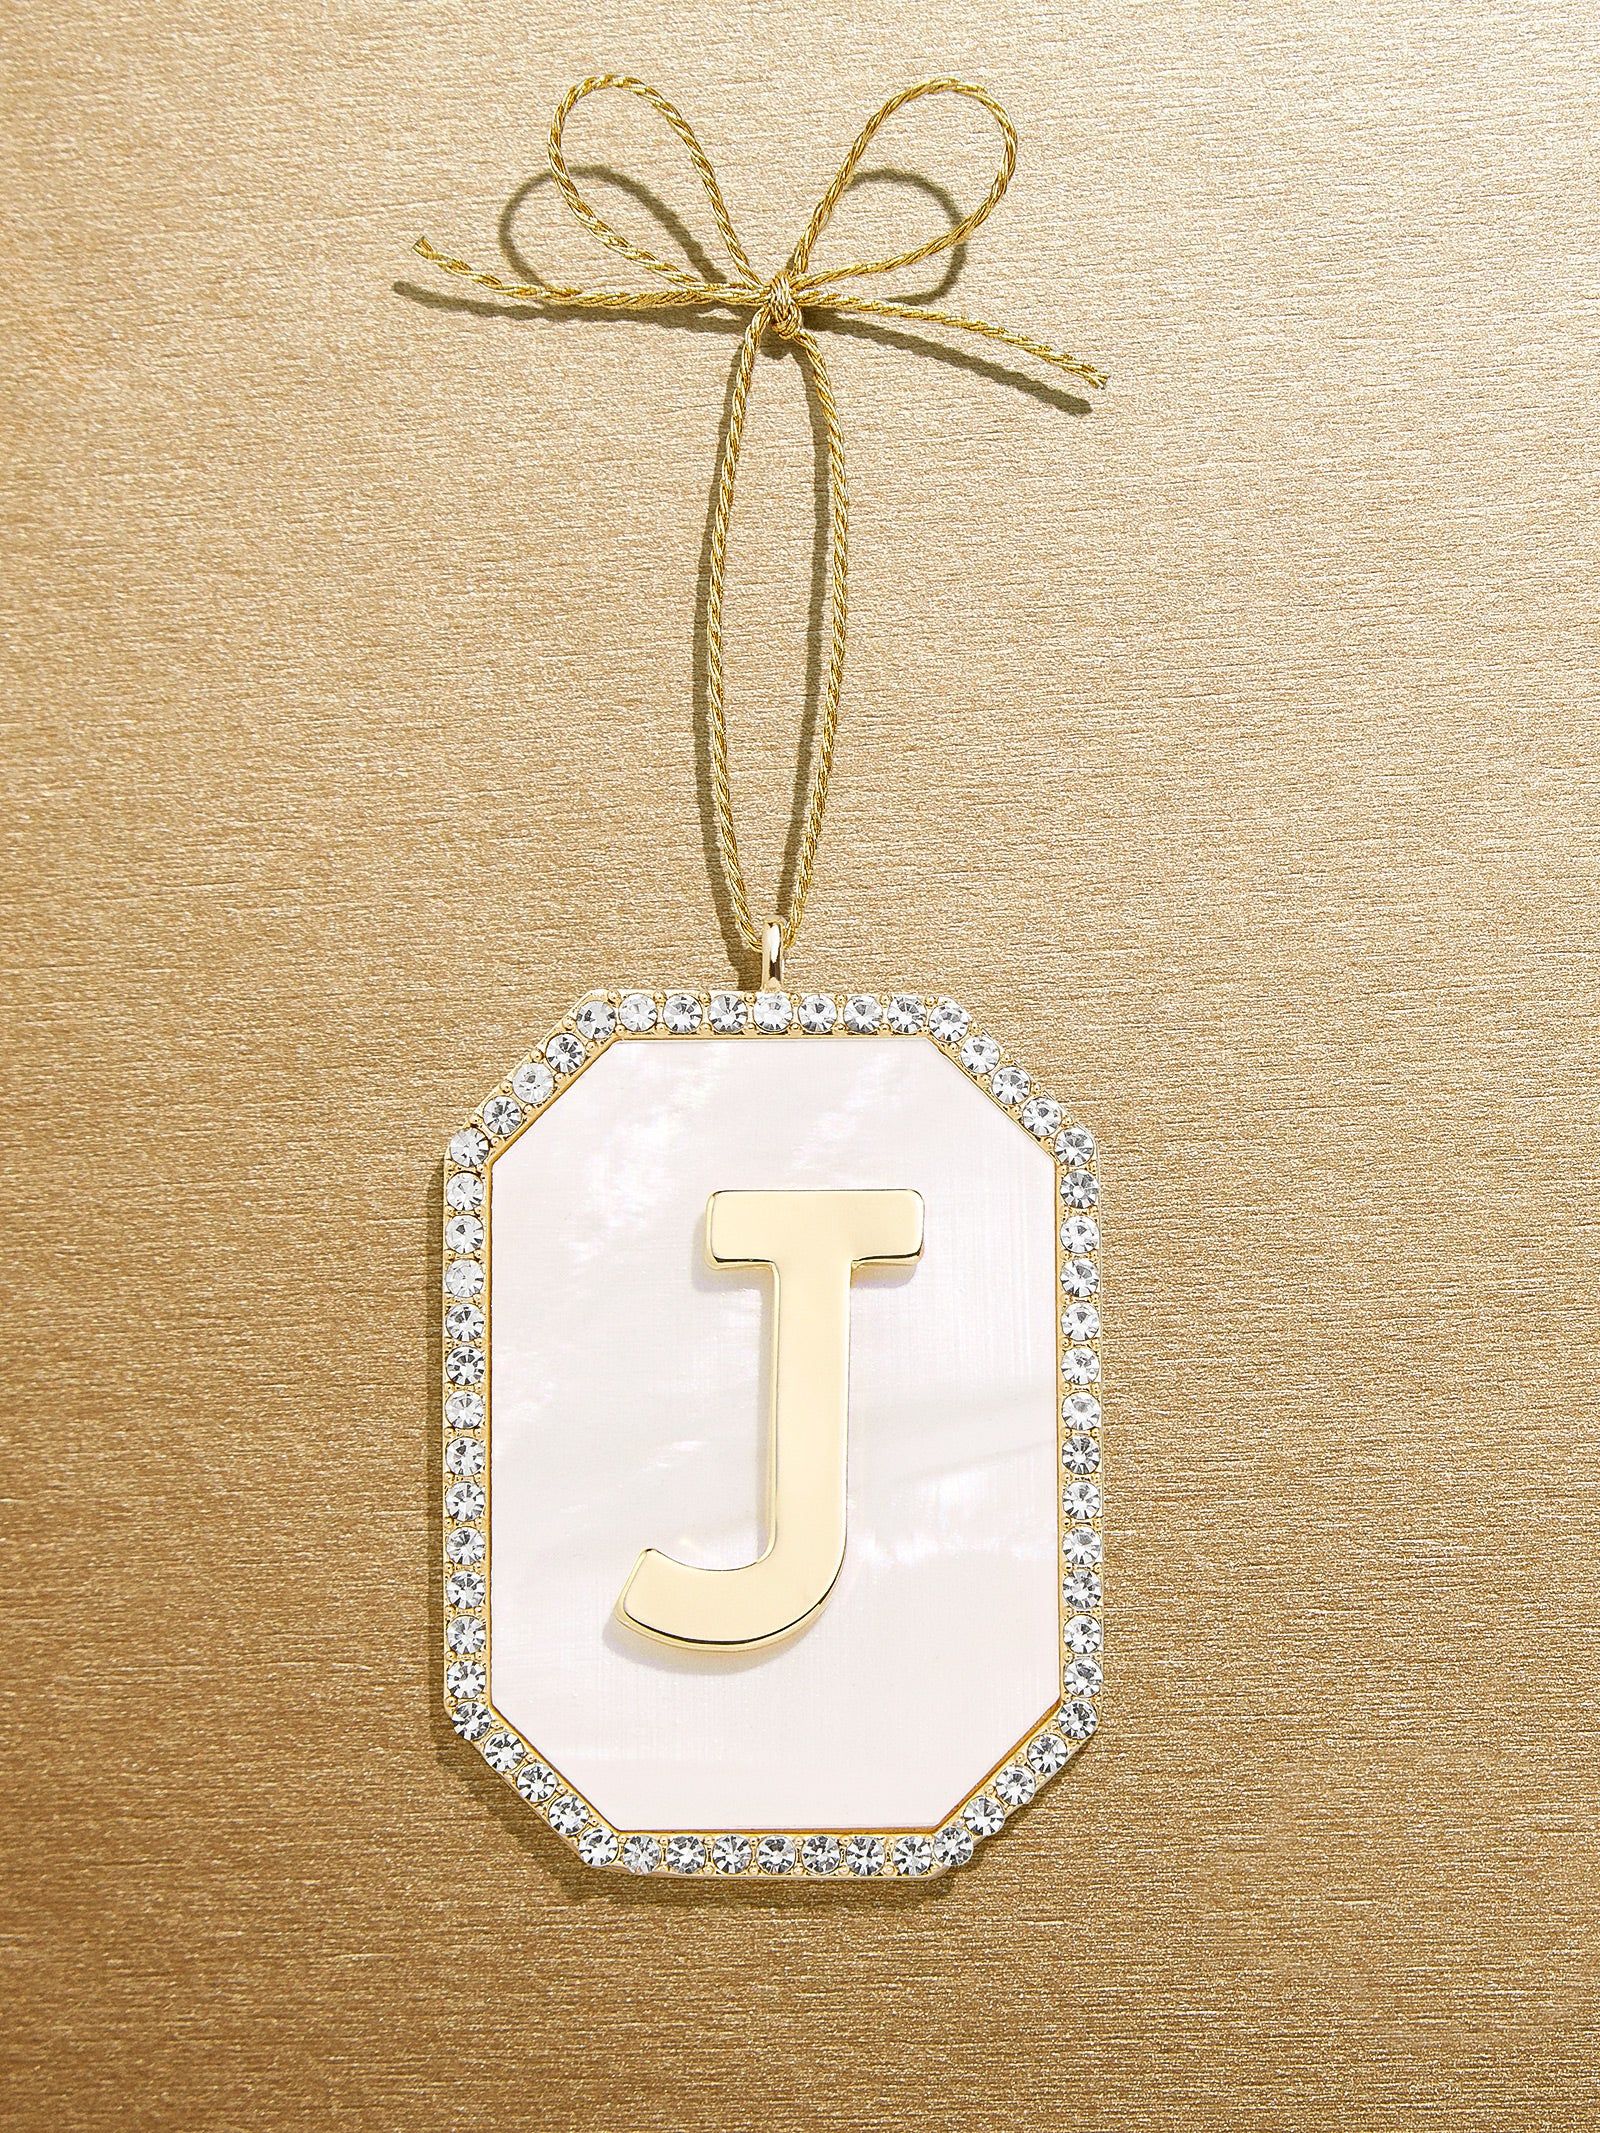 Hung With Care Initial Ornament - Hung With Care Initial | BaubleBar (US)